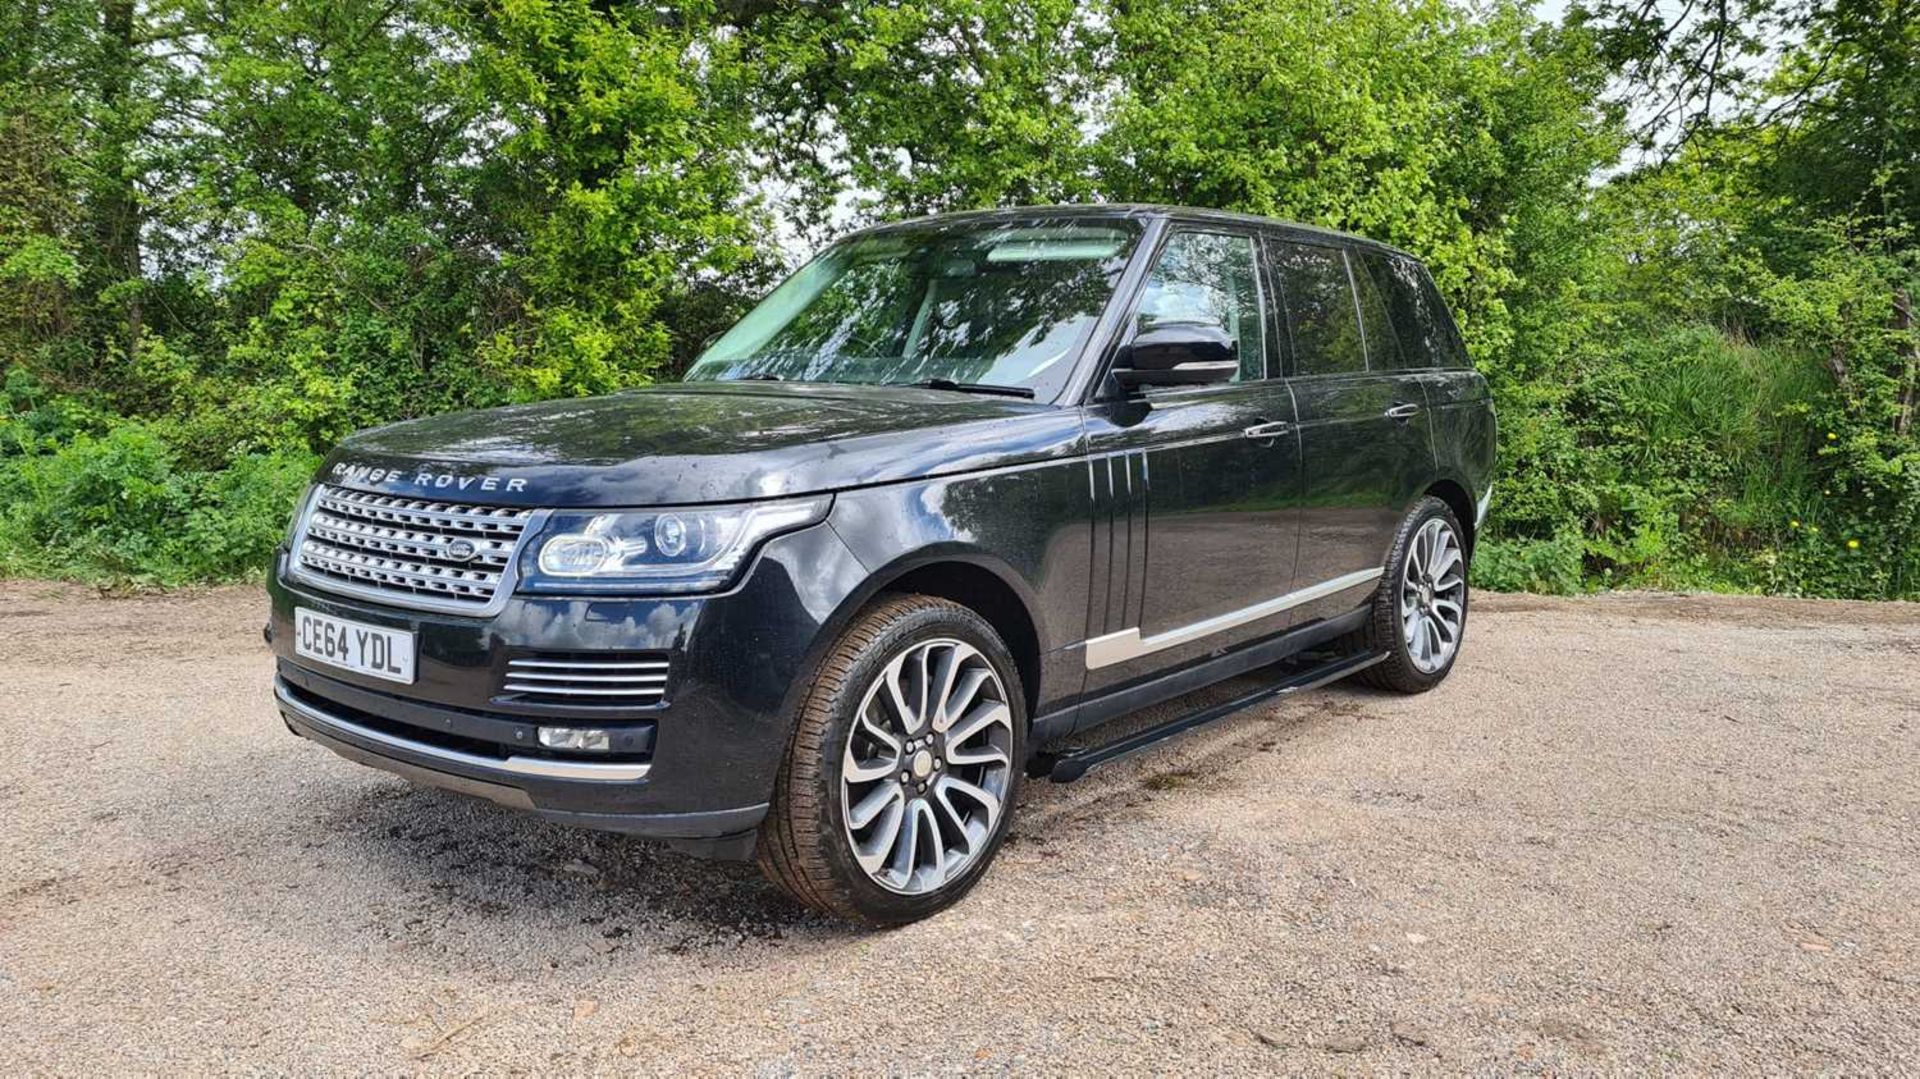 2014 Range Rover Autobiography SDV8, Auto, Paddle Shift, Parking Sensors, Full Leather, Heated Elect